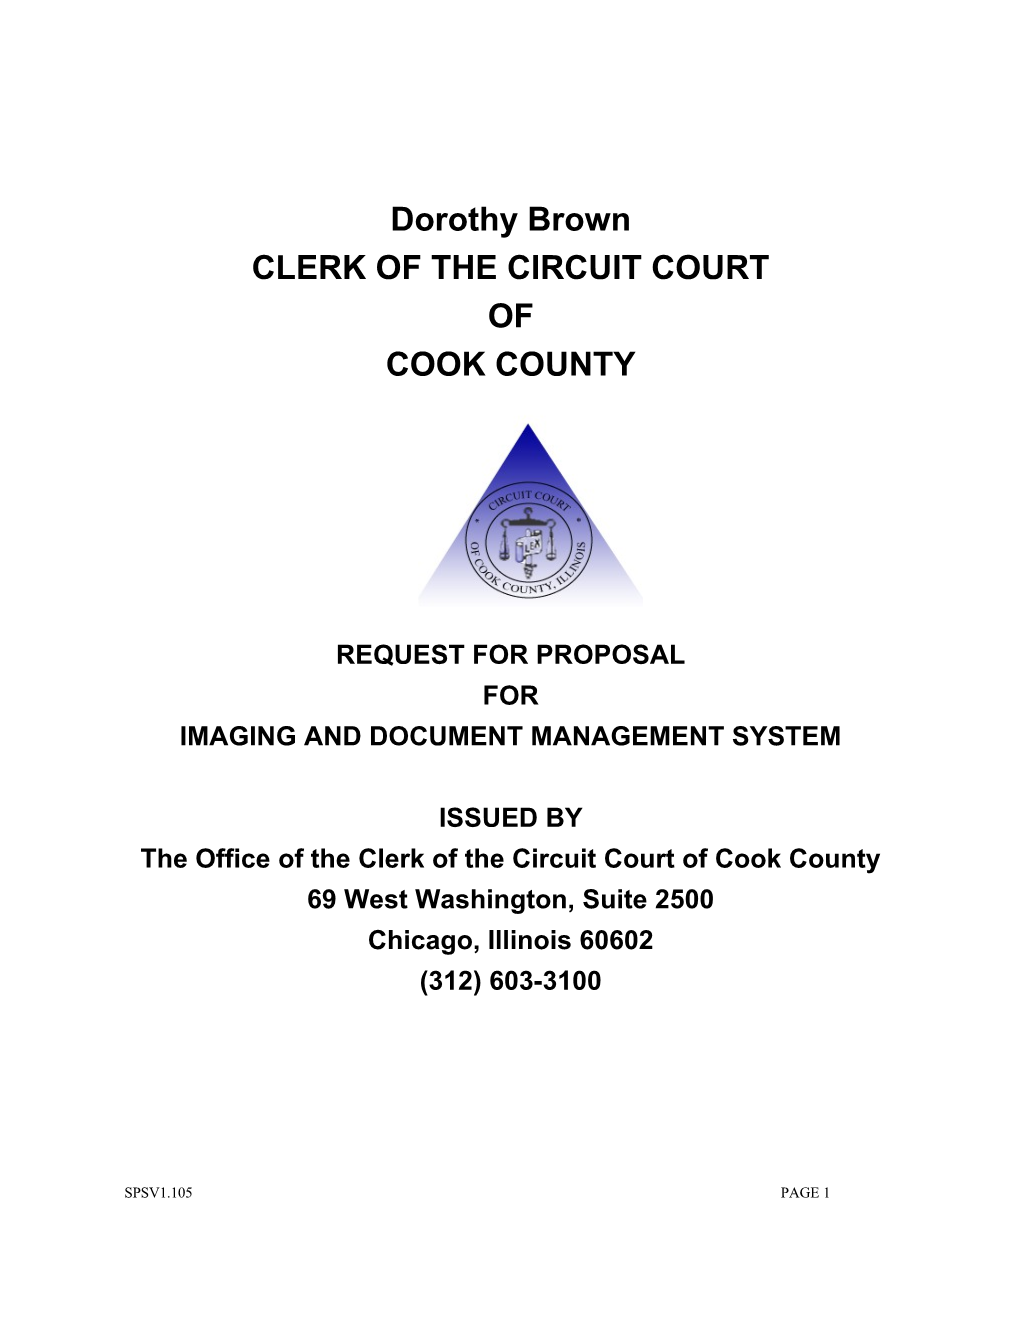 Clerk of the Circuit Court